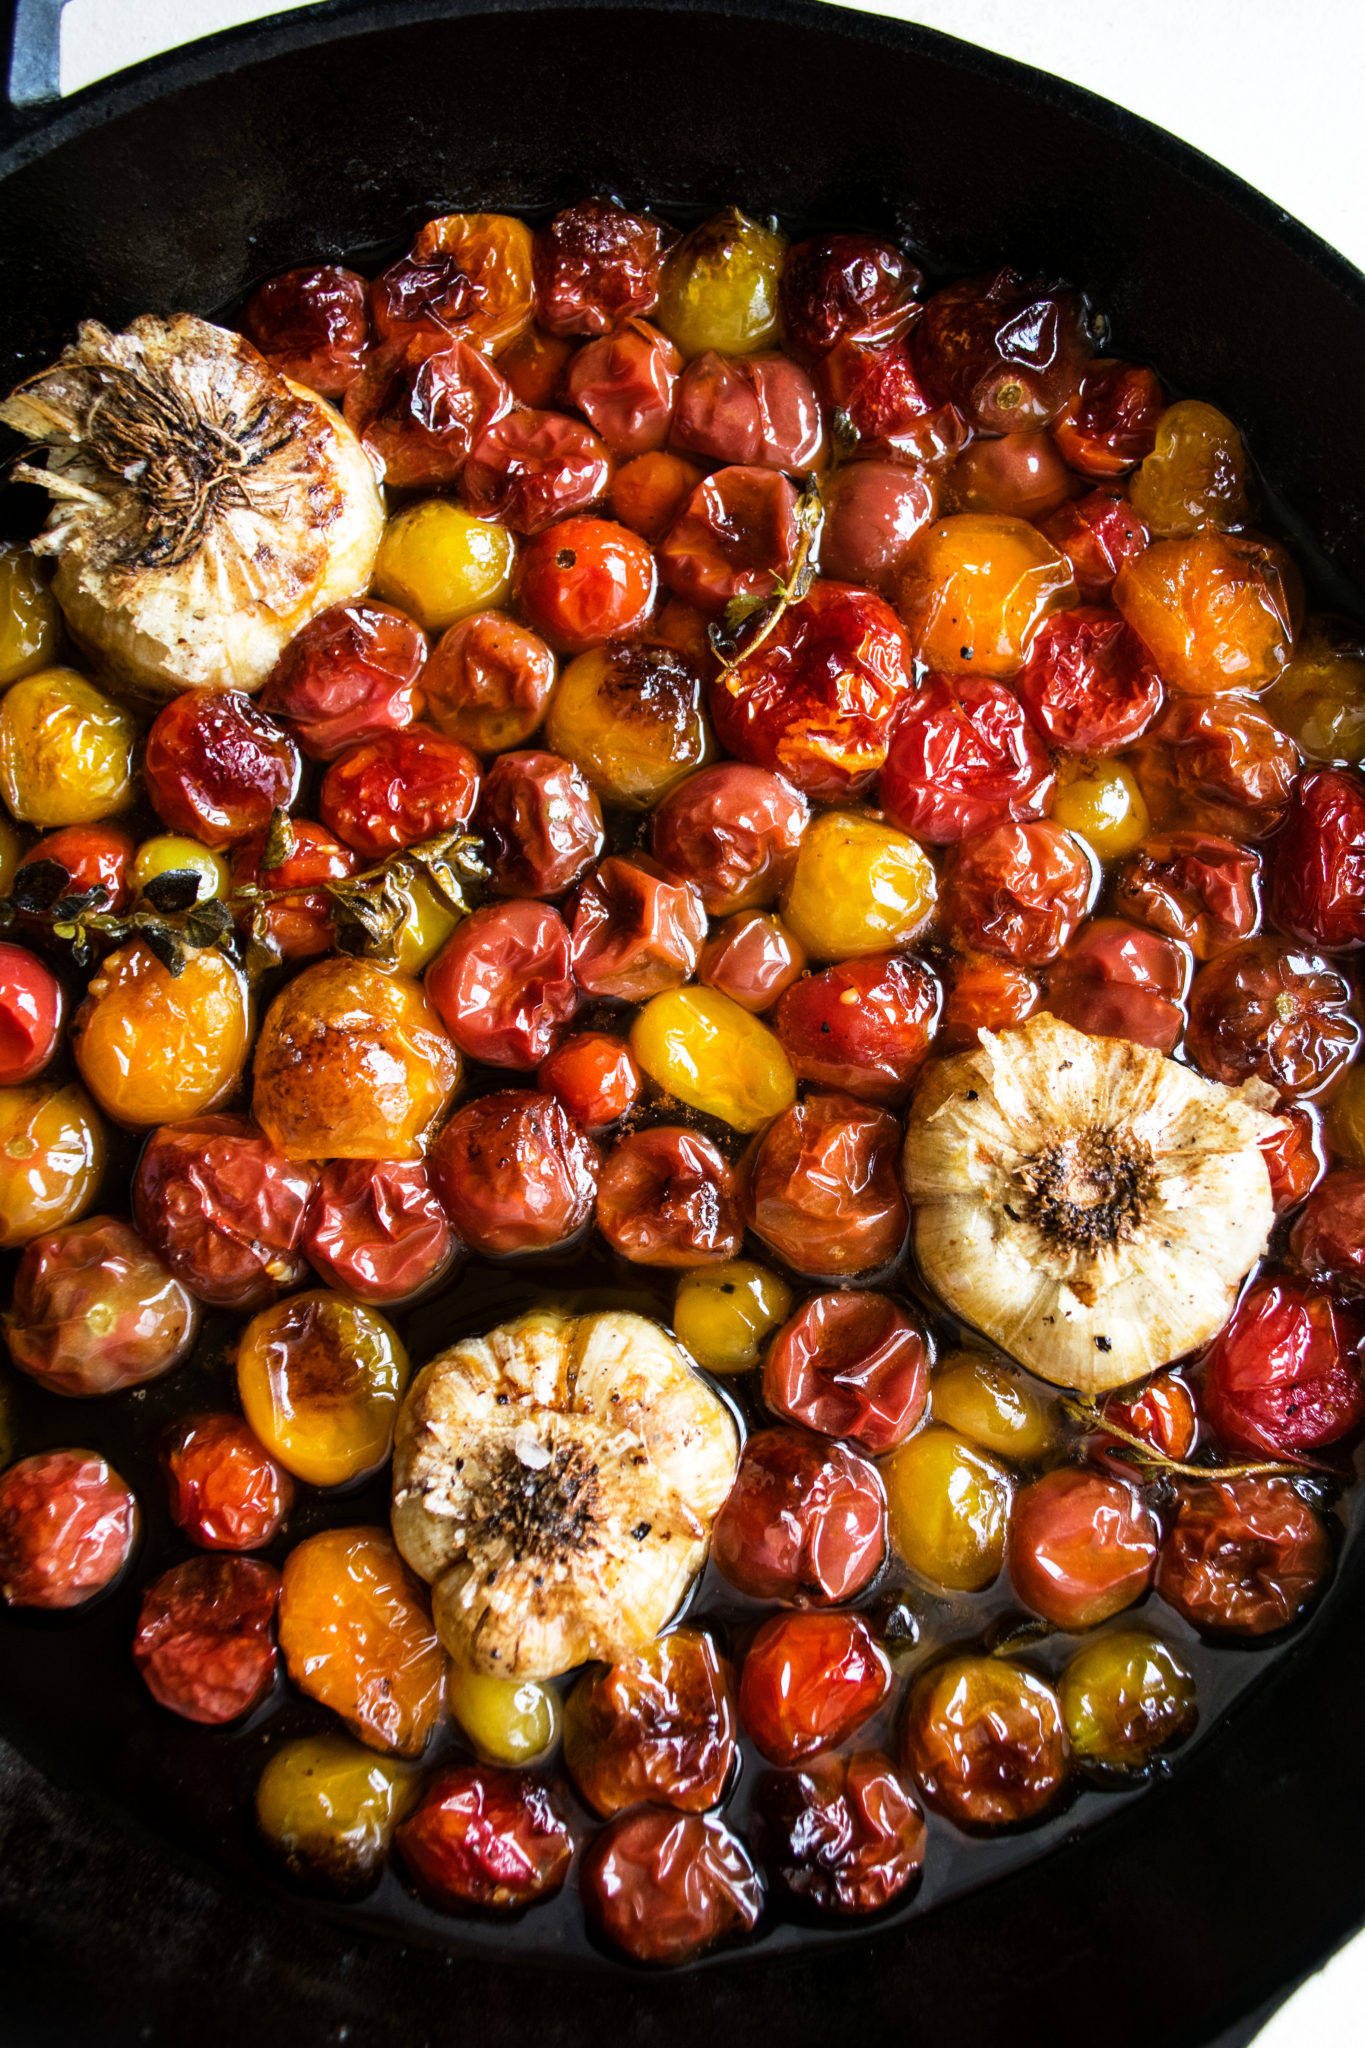 How To Roast Cherry Tomatoes with Garlic & Herbs - The Original Dish